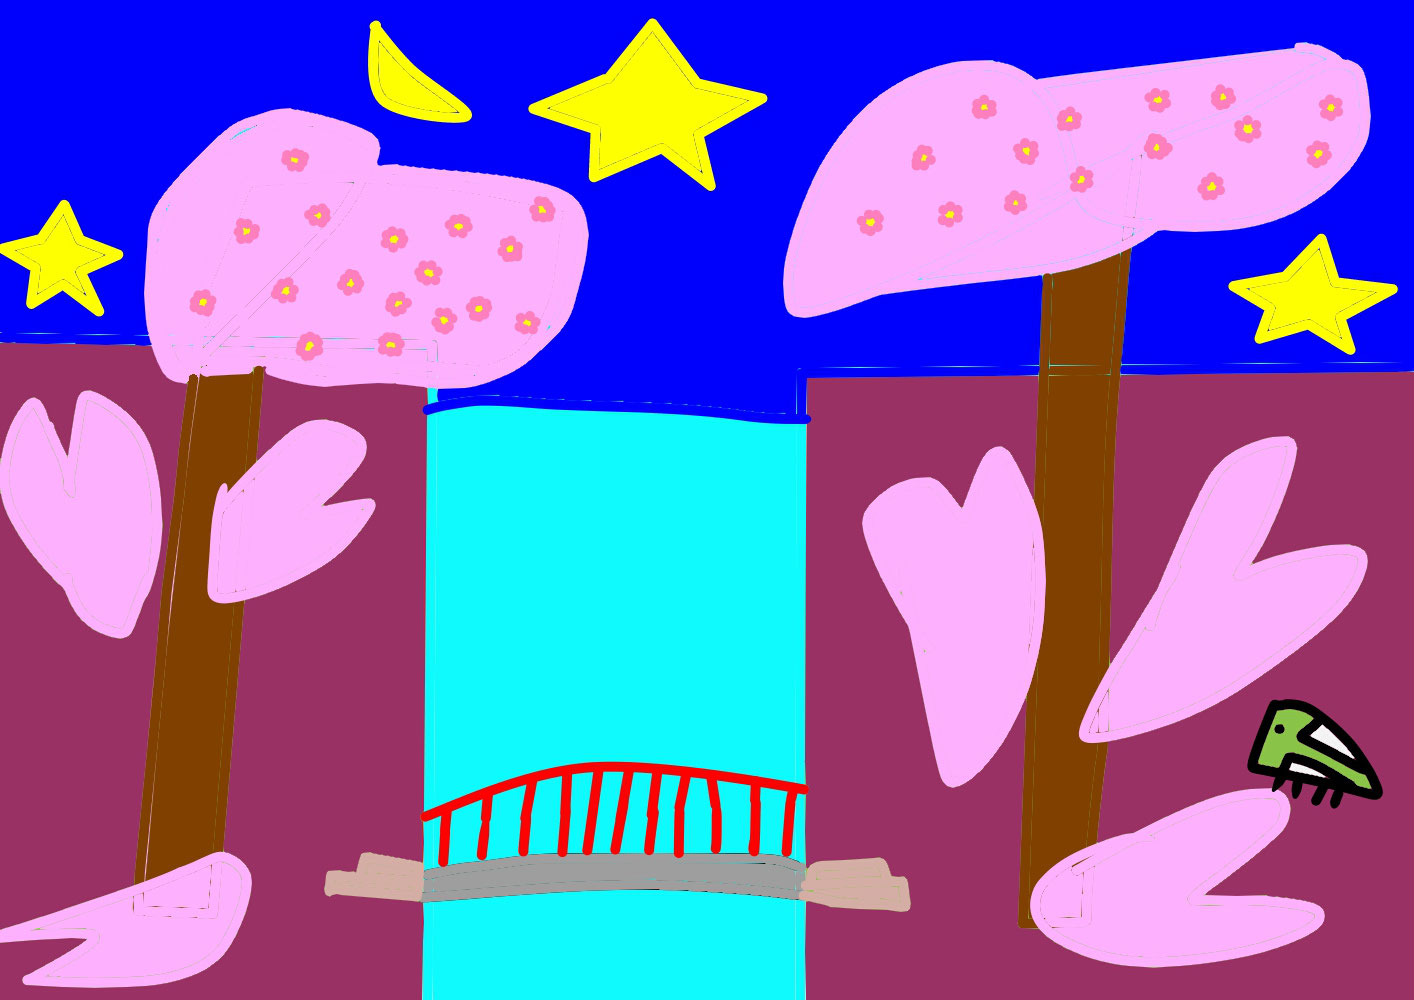 Cherry blossoms (さくら) / Creation date: February 2023 / Age 6